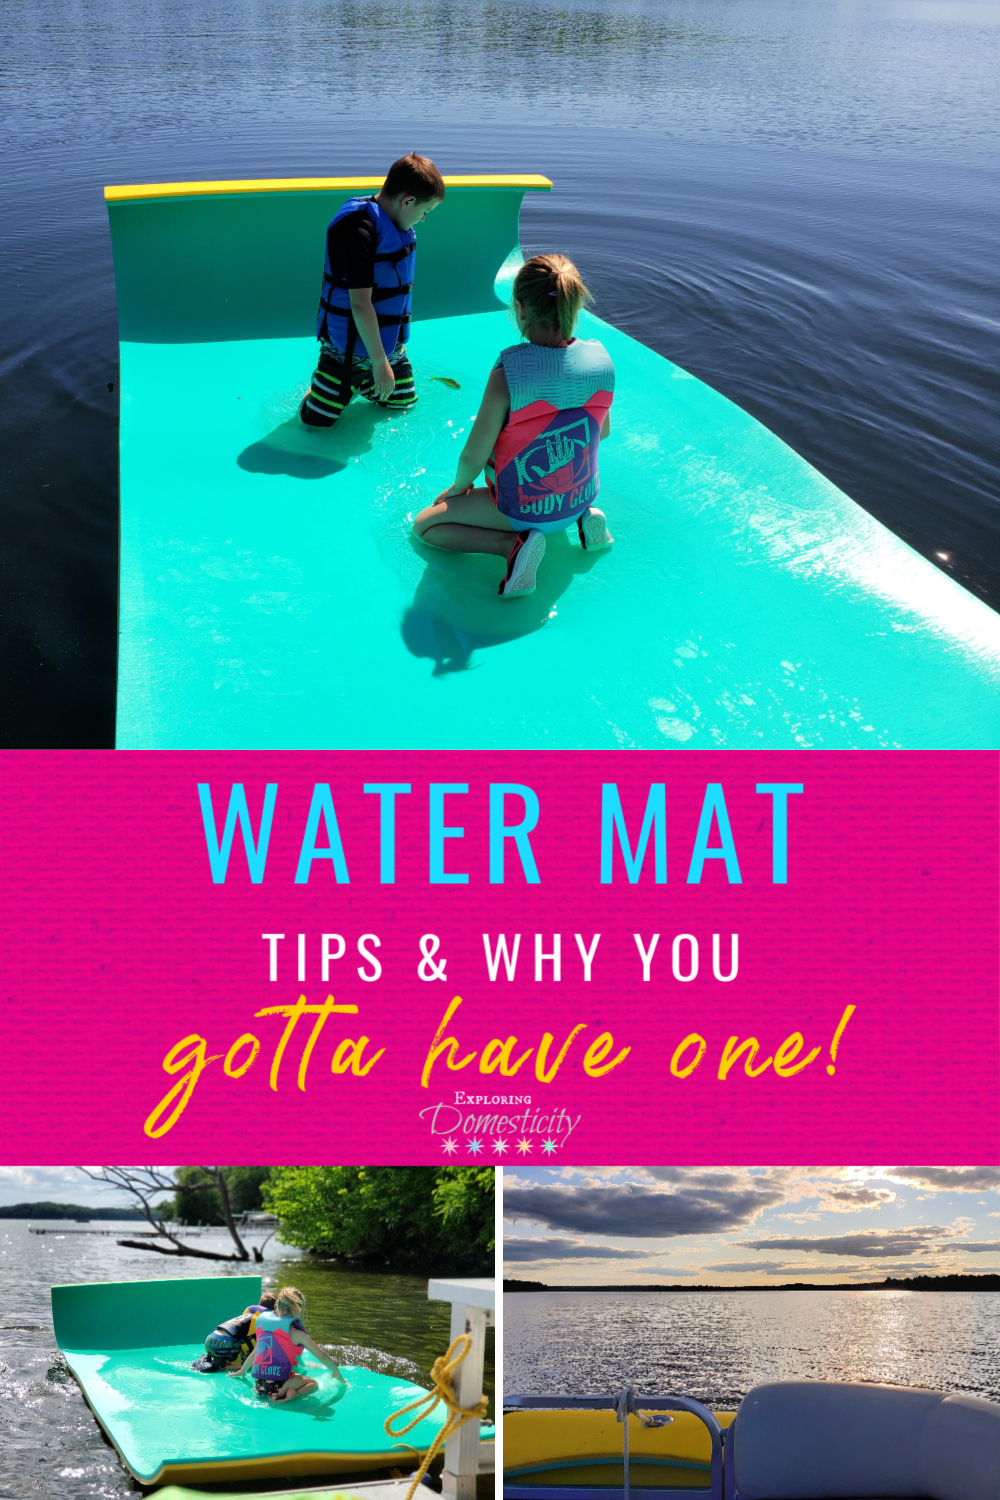 https://exploringdomesticity.com/wp-content/uploads/2020/05/Water-Mat-tips-and-why-you-gotta-have-one.png